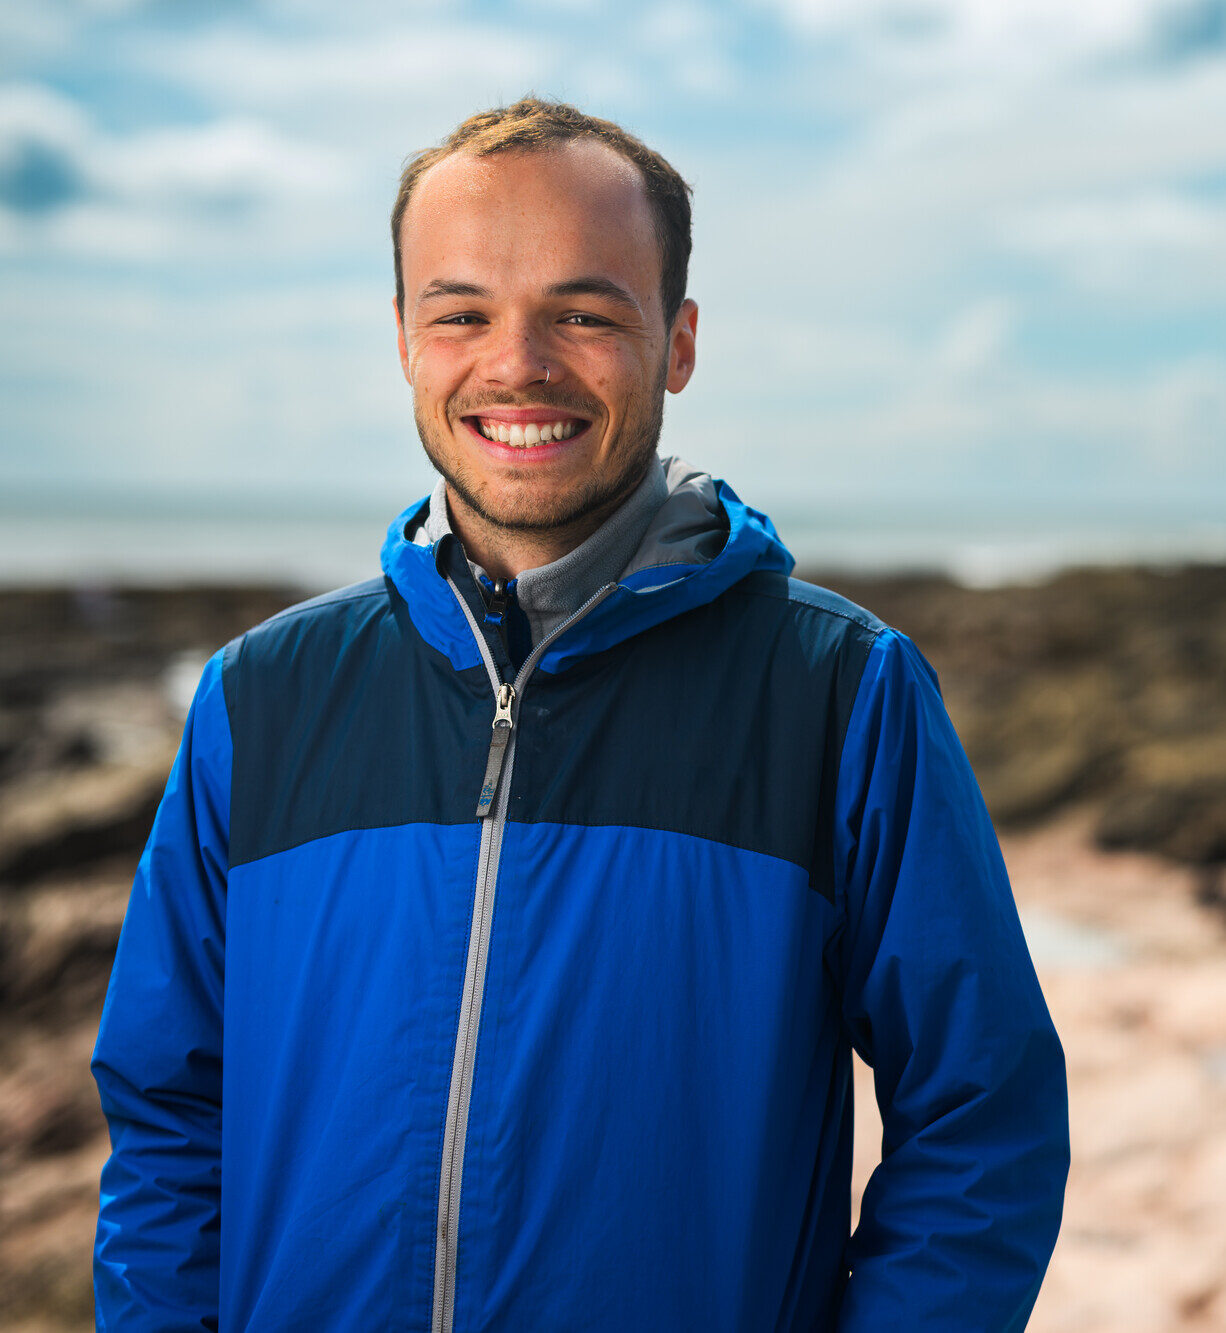 Fraser Brough on the rocky shore smiling